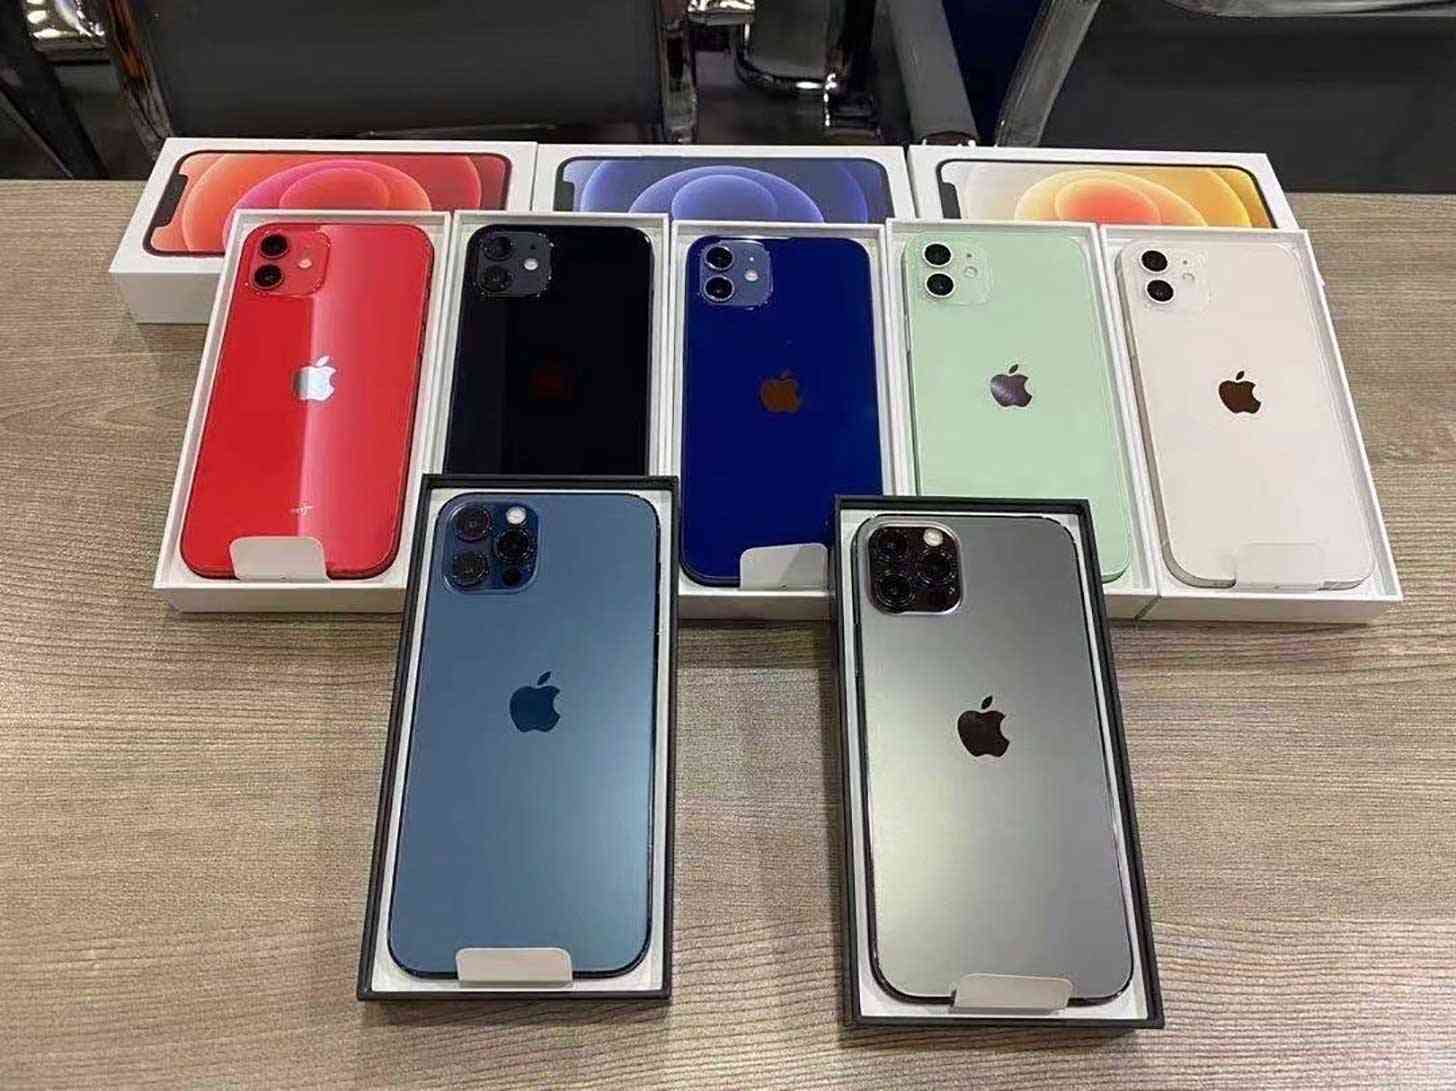 iPhone 12, iPhone 12 Pro colors